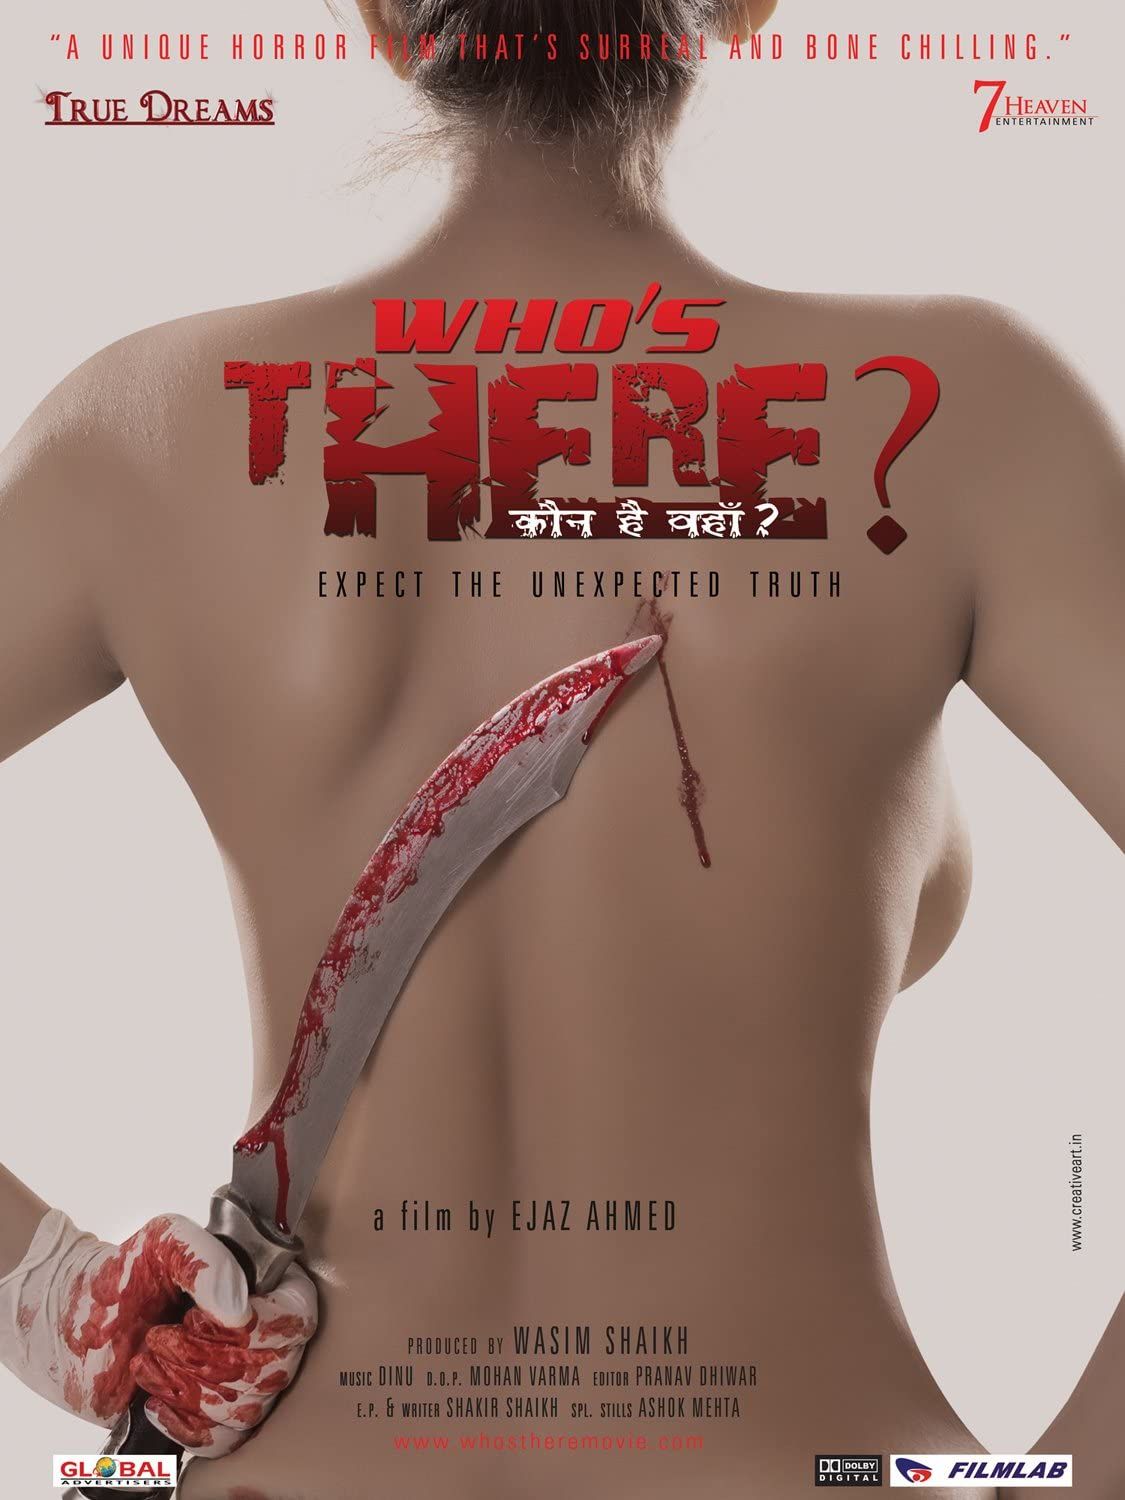 Whos There (2011) Hindi WEBRip download full movie